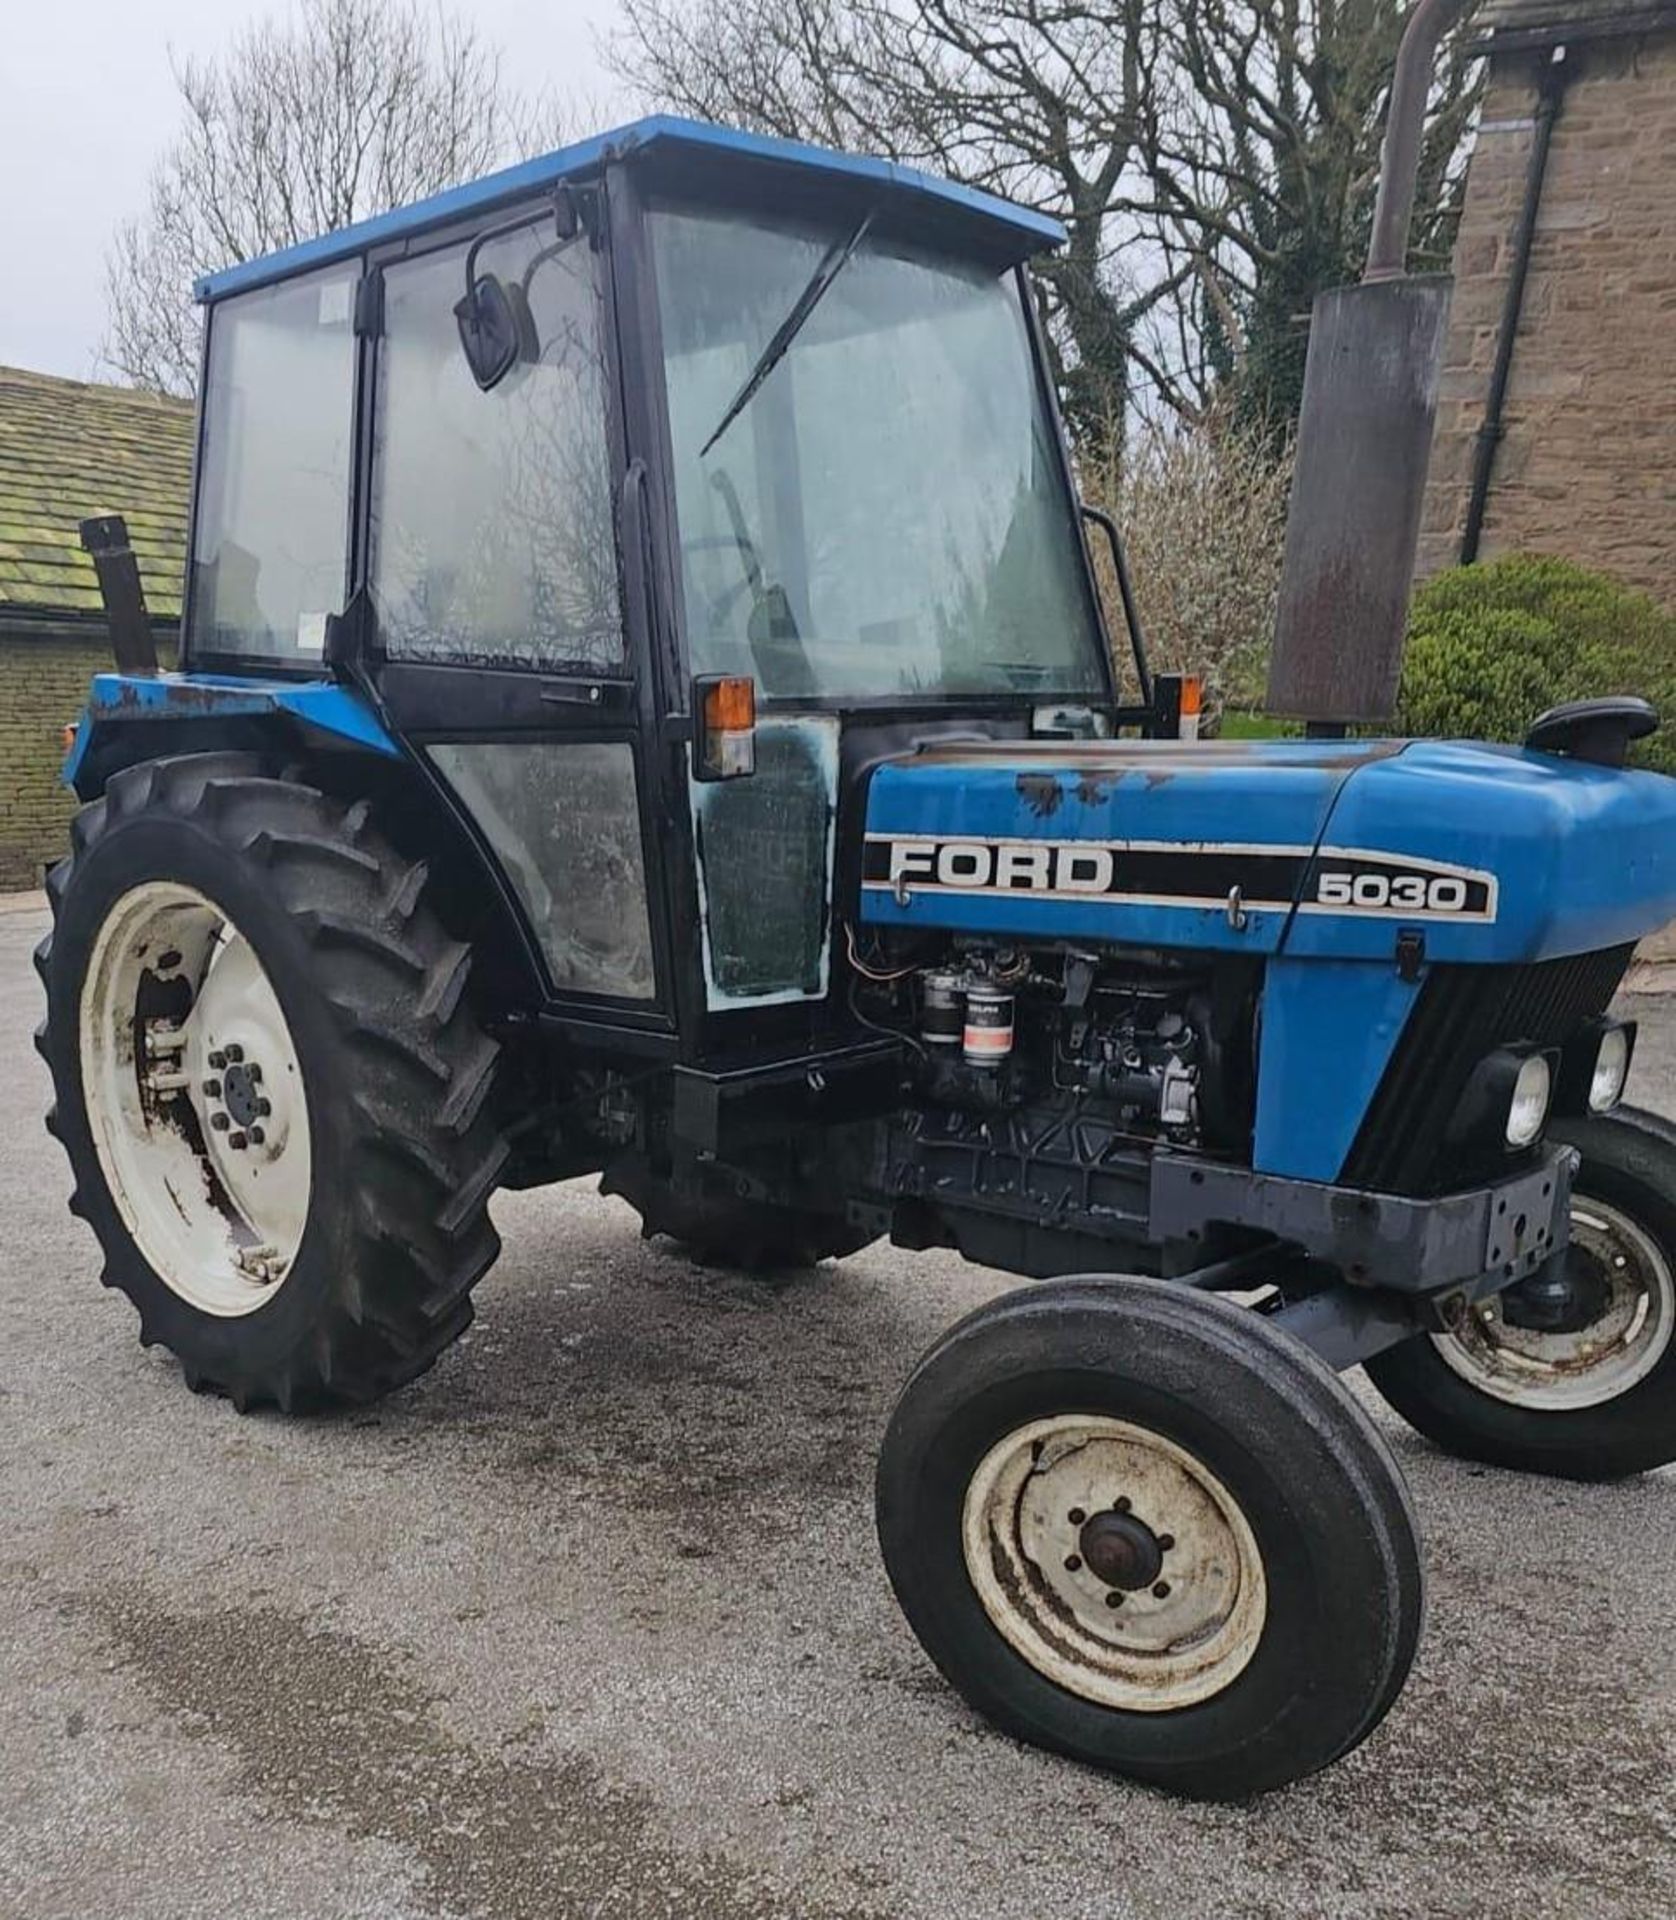 FORD 5030 2 WHEEL DRIVE TRACTOR 9014 HOURS ONE OWNER FROM NEW REG.NO. M85 TRC FIRST REG 01/06/95 - Image 3 of 13